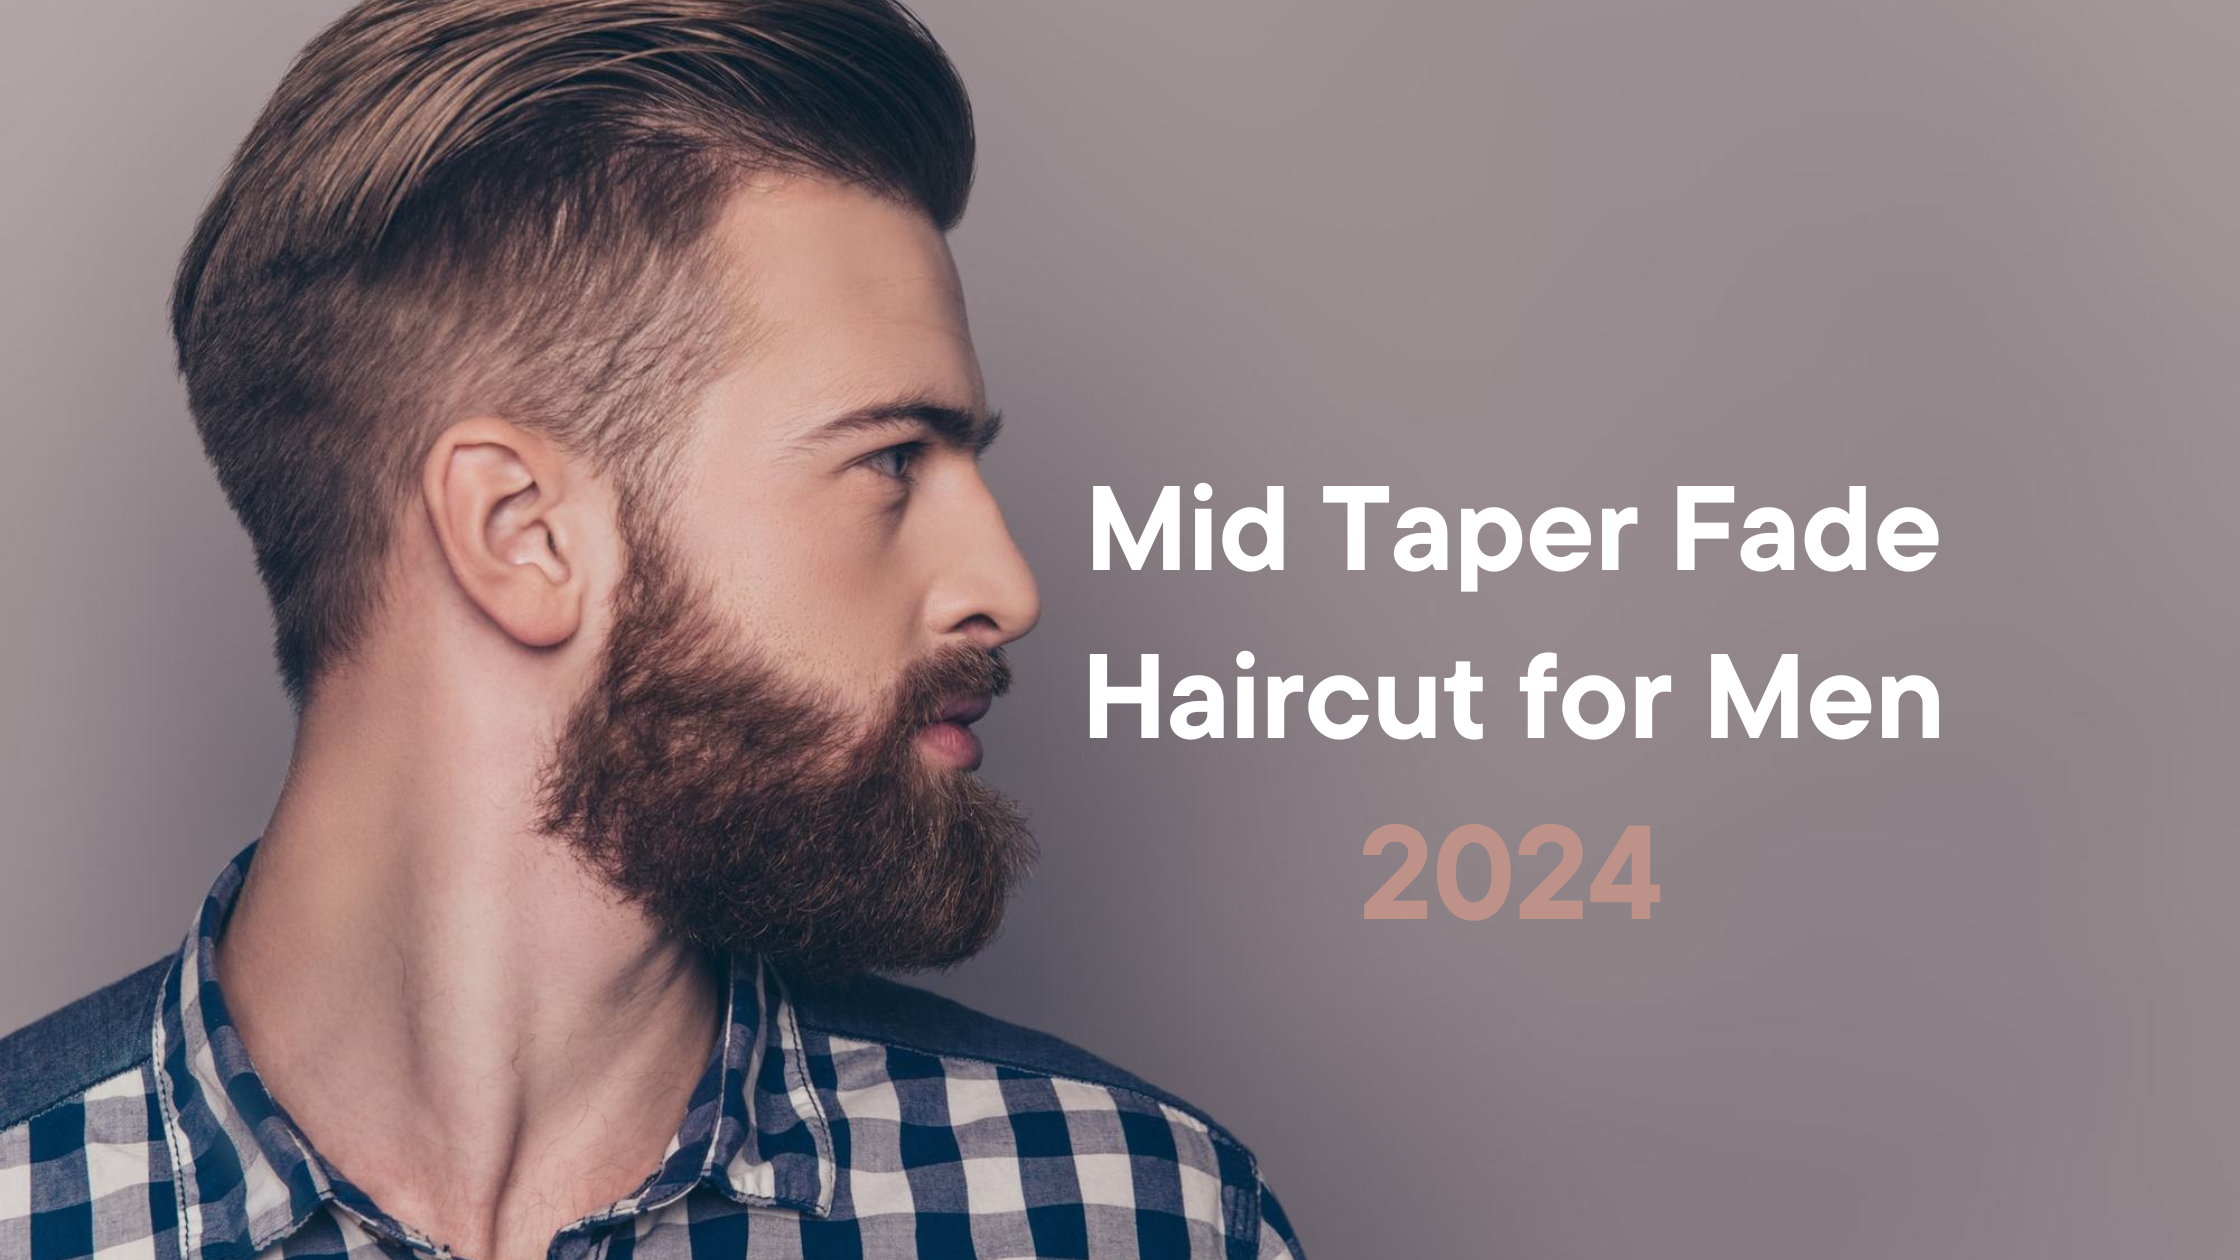 Best Mid Taper Fade Haircut for Men 2024 l Men's Latest Haircut Trends